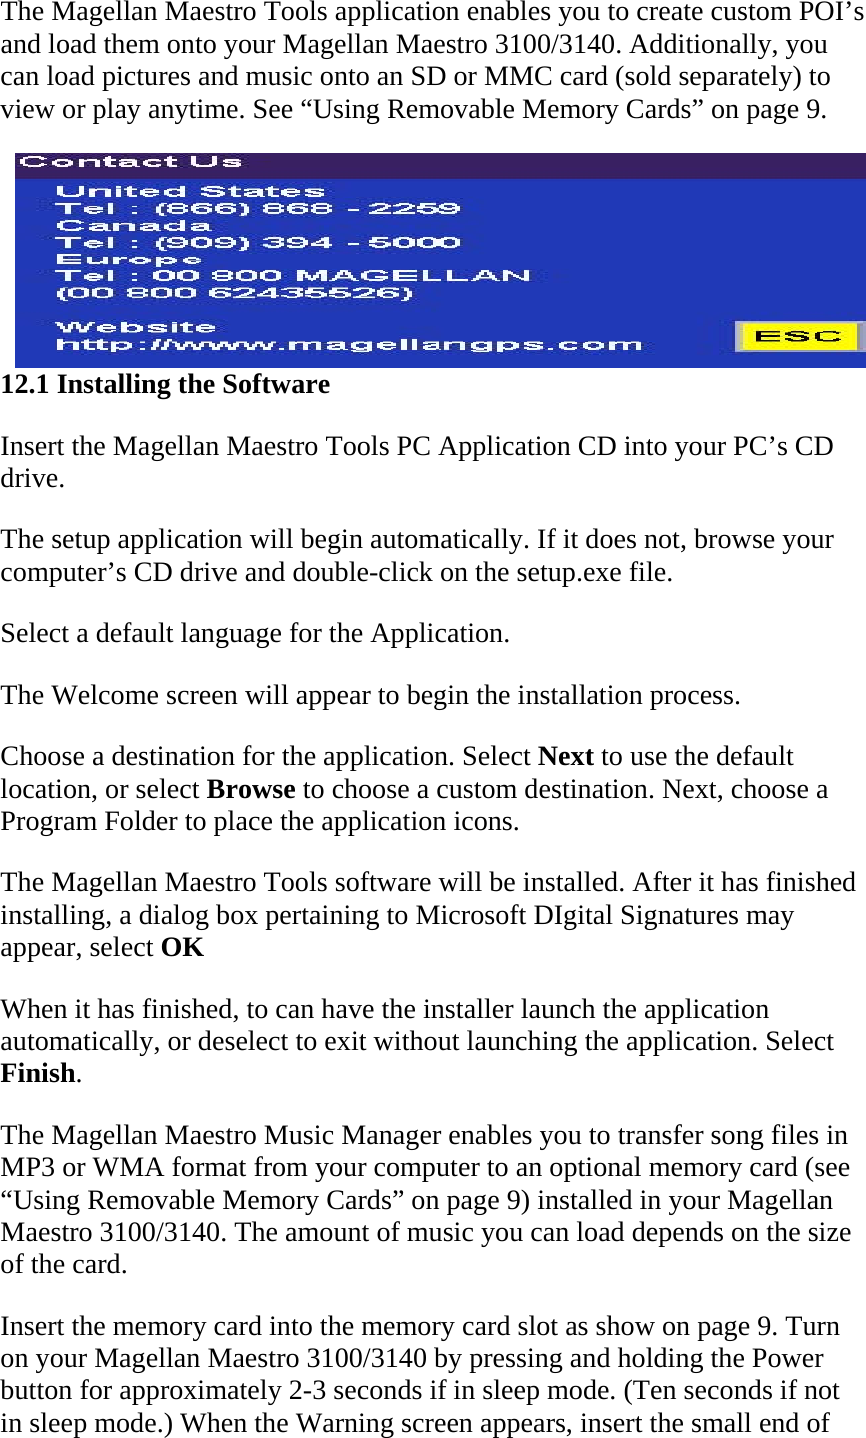 The Magellan Maestro Tools application enables you to create custom POI’s and load them onto your Magellan Maestro 3100/3140. Additionally, you can load pictures and music onto an SD or MMC card (sold separately) to view or play anytime. See “Using Removable Memory Cards” on page 9.  12.1 Installing the Software  Insert the Magellan Maestro Tools PC Application CD into your PC’s CD drive.  The setup application will begin automatically. If it does not, browse your computer’s CD drive and double-click on the setup.exe file.  Select a default language for the Application.  The Welcome screen will appear to begin the installation process.  Choose a destination for the application. Select Next to use the default location, or select Browse to choose a custom destination. Next, choose a Program Folder to place the application icons.  The Magellan Maestro Tools software will be installed. After it has finished installing, a dialog box pertaining to Microsoft DIgital Signatures may appear, select OK  When it has finished, to can have the installer launch the application automatically, or deselect to exit without launching the application. Select Finish.  The Magellan Maestro Music Manager enables you to transfer song files in MP3 or WMA format from your computer to an optional memory card (see “Using Removable Memory Cards” on page 9) installed in your Magellan Maestro 3100/3140. The amount of music you can load depends on the size of the card.  Insert the memory card into the memory card slot as show on page 9. Turn on your Magellan Maestro 3100/3140 by pressing and holding the Power button for approximately 2-3 seconds if in sleep mode. (Ten seconds if not in sleep mode.) When the Warning screen appears, insert the small end of 